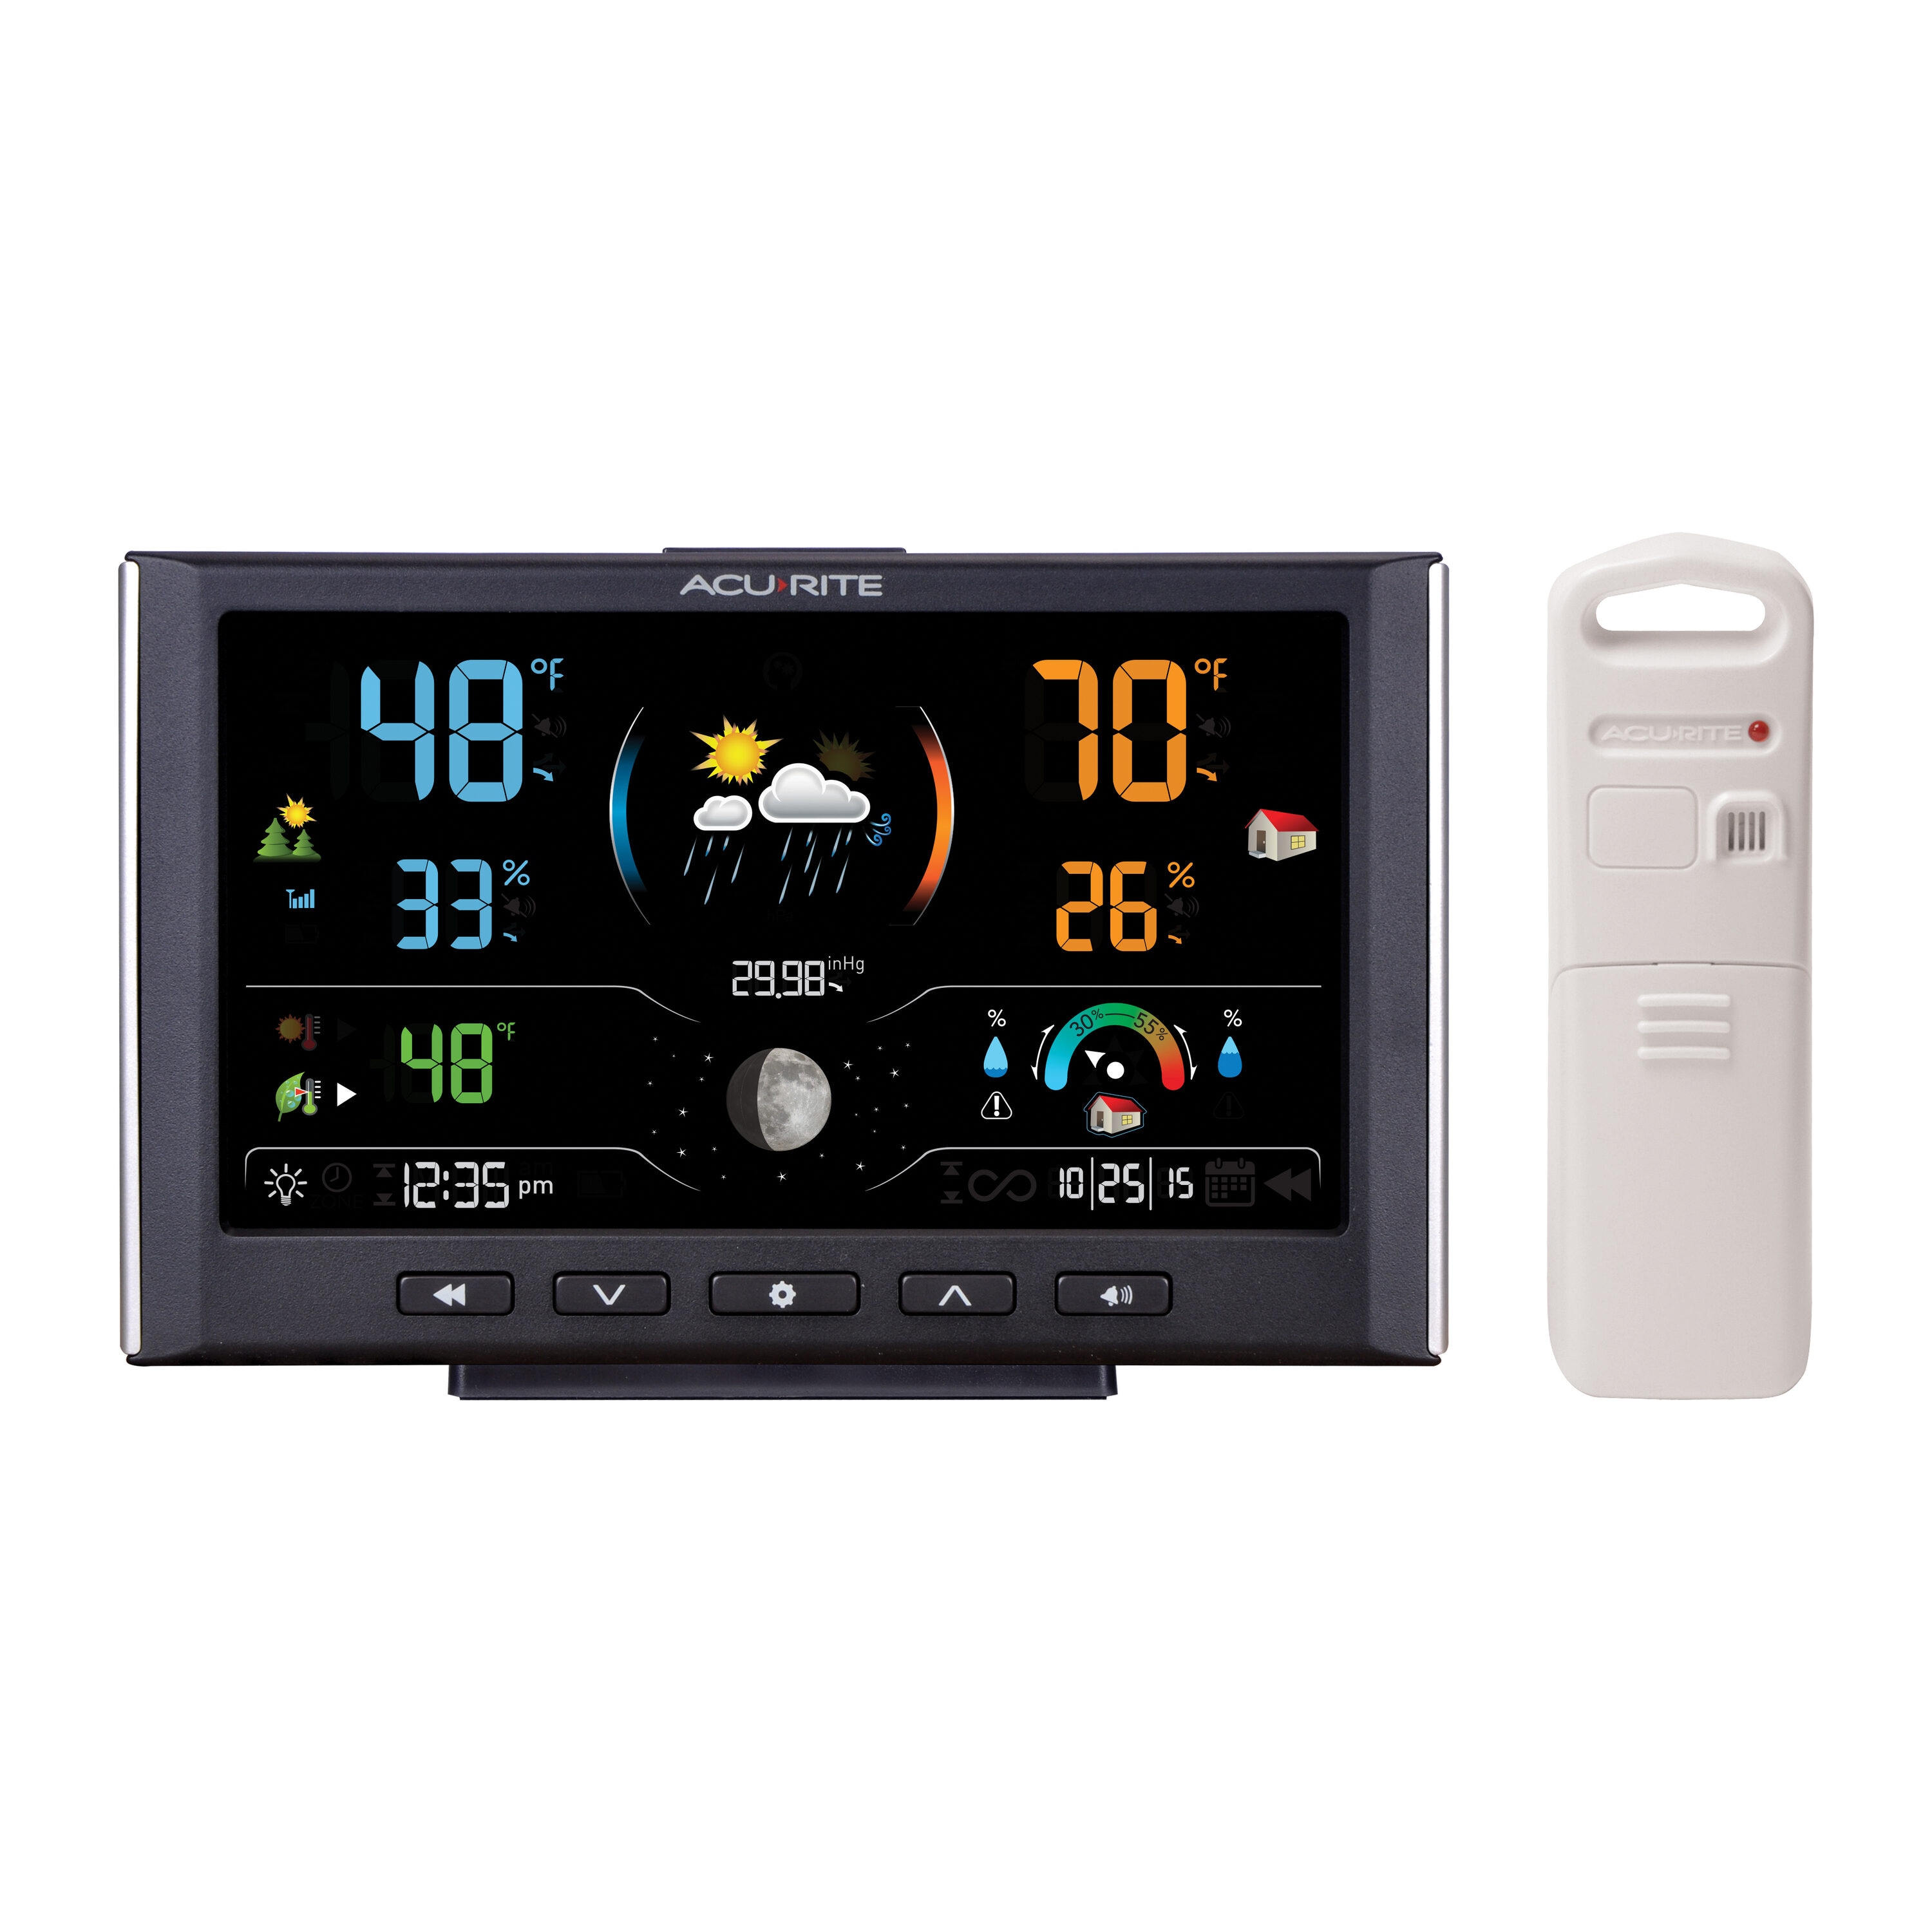 Outdoor weather station BTH